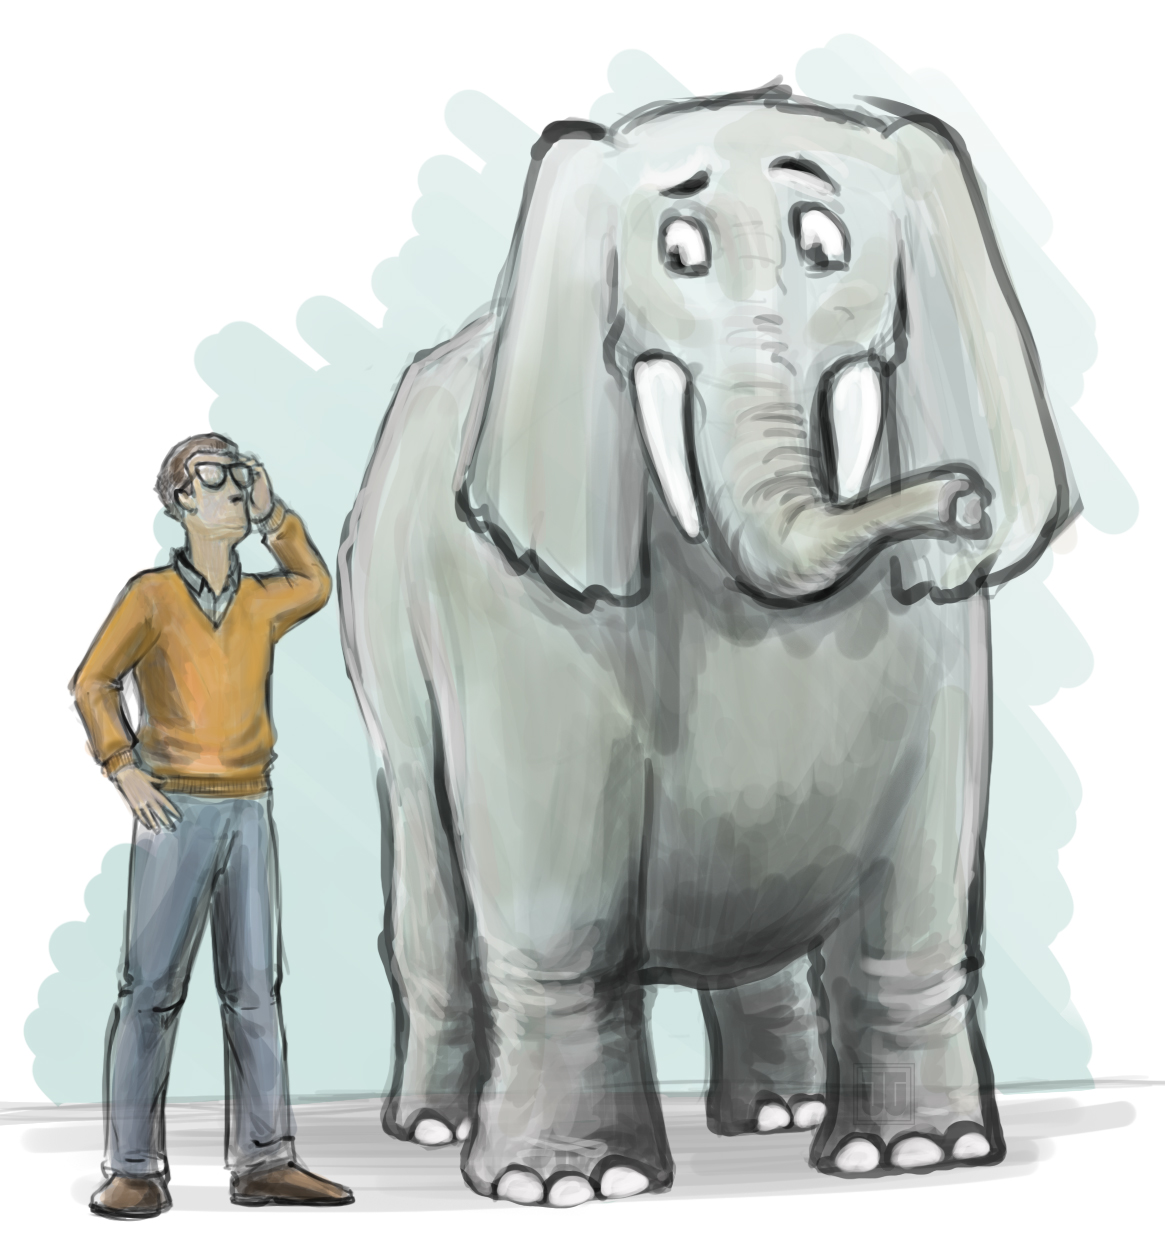 A drawing of a human wearing glasses, standing next to and looking up towards a elephant with eyebrows in a confused expression